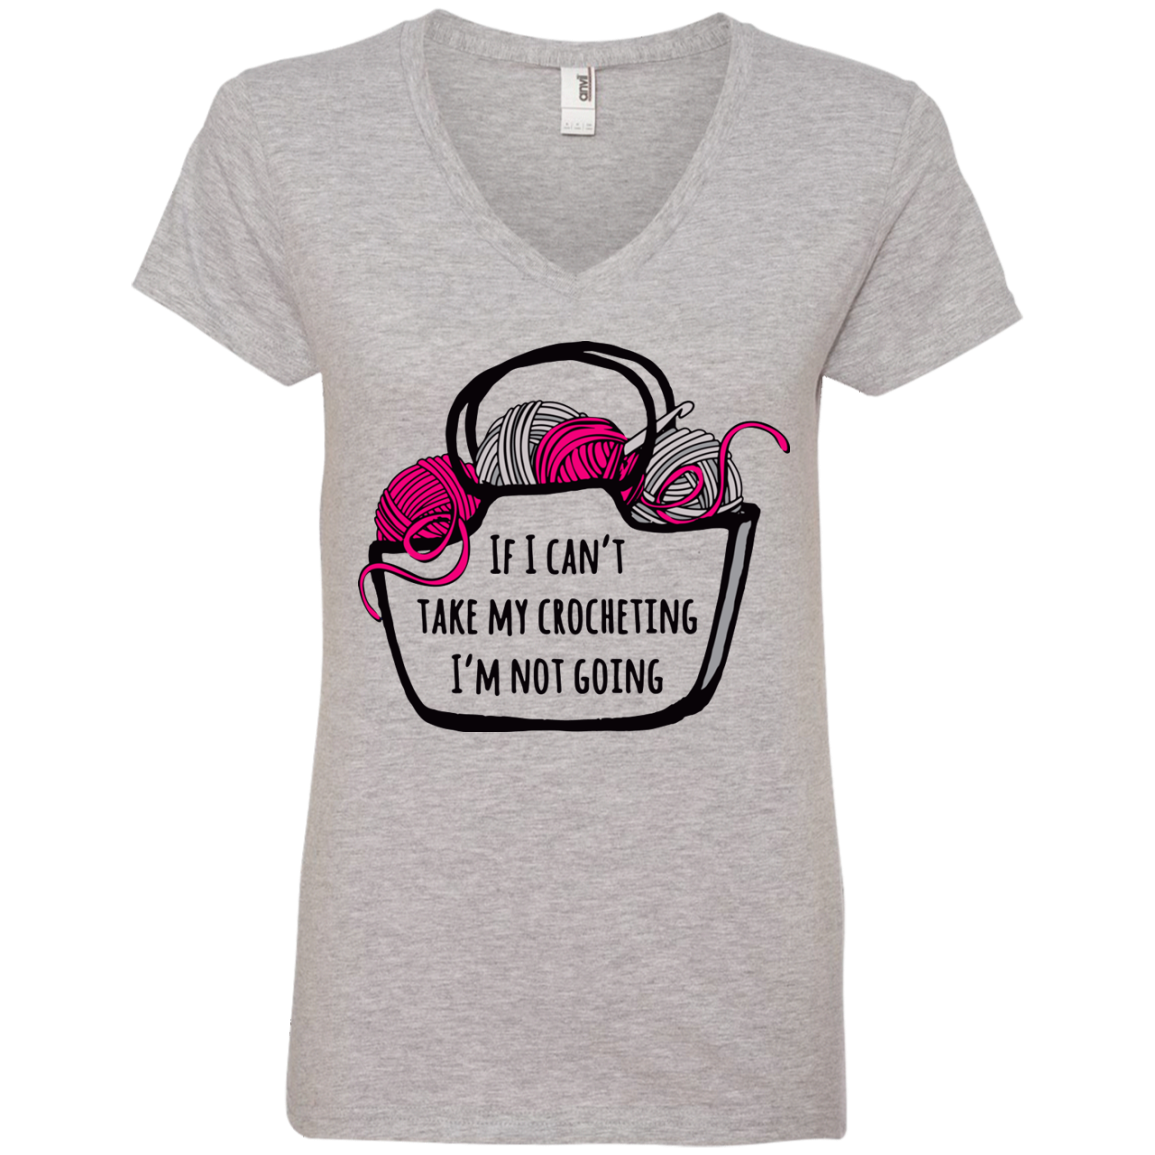 If I Can't Take My Crocheting Ladies' V-Neck T-Shirt